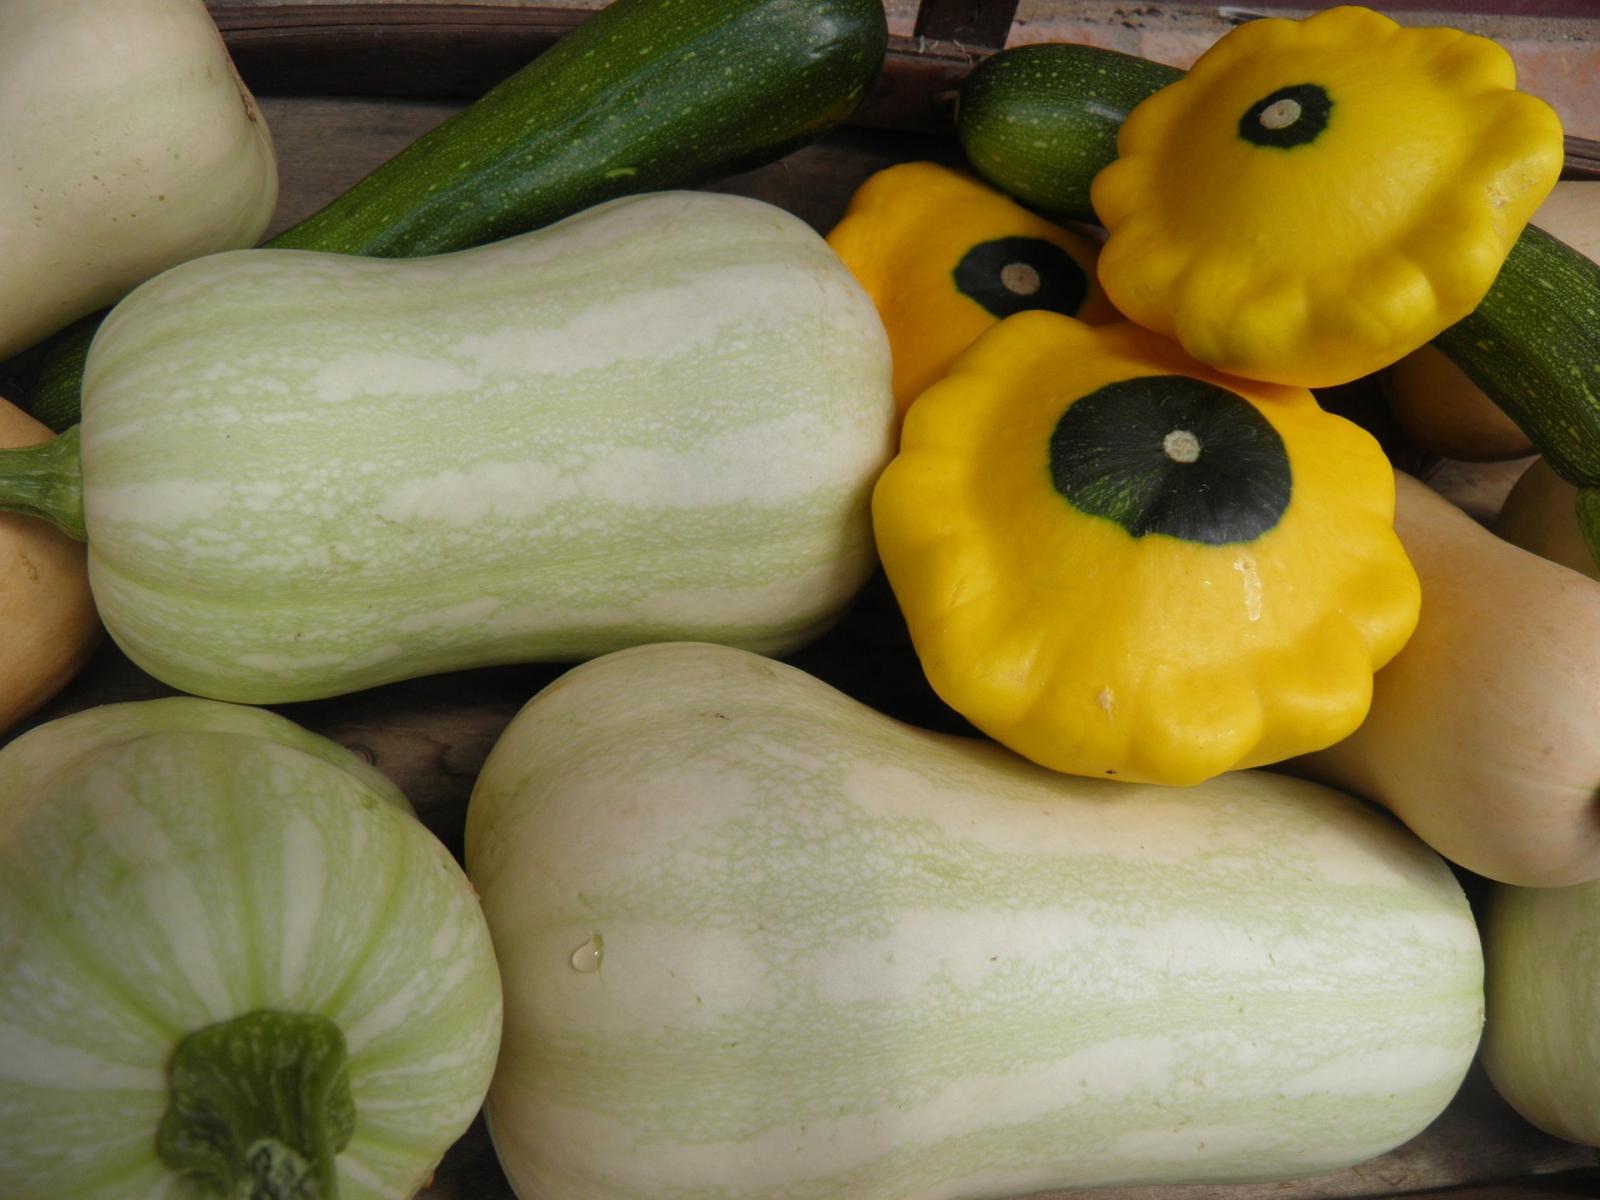 Butternut and patty pan squash are separate Cucurbita species and will not cross pollinate.